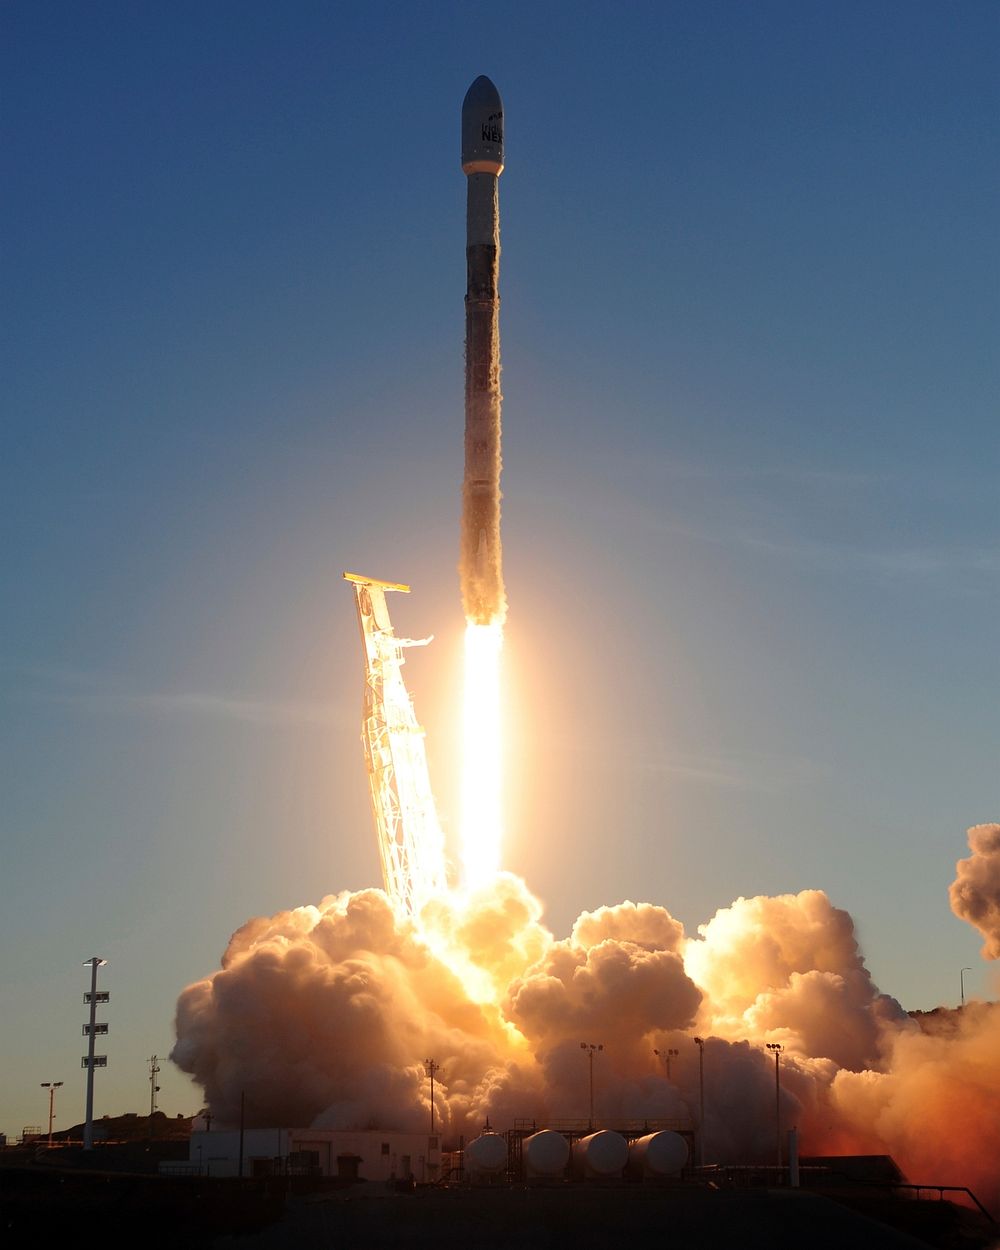 Team Vandenberg supported the successful launch of the fifth Iridium mission on a SpaceX Falcon 9 rocket from Space Launch…